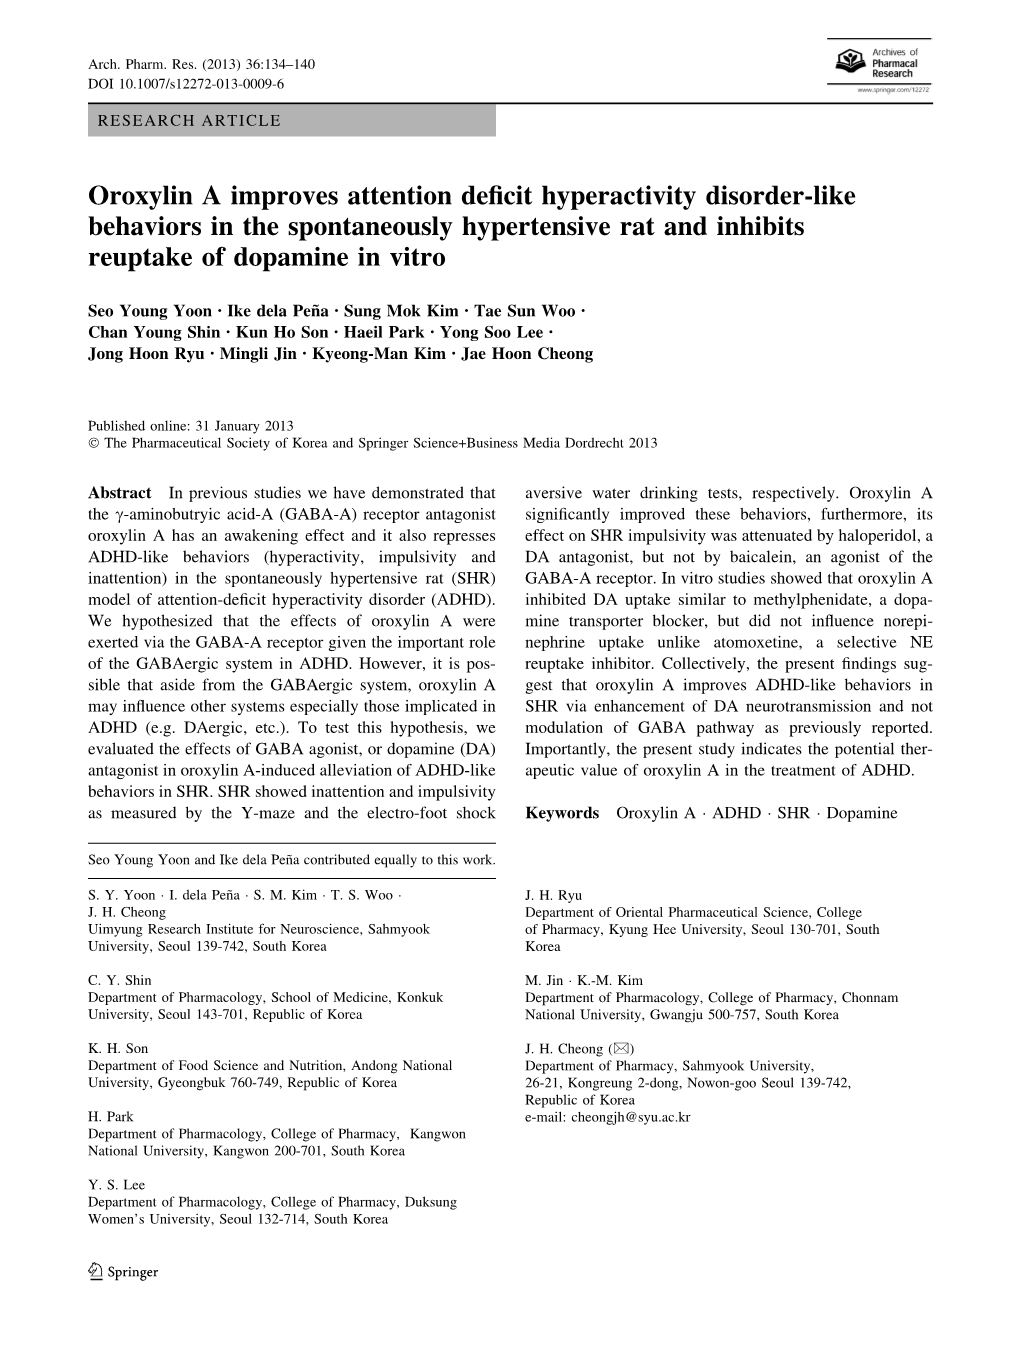 Oroxylin a Improves Attention Deficit Hyperactivity Disorder Rat Inhibits